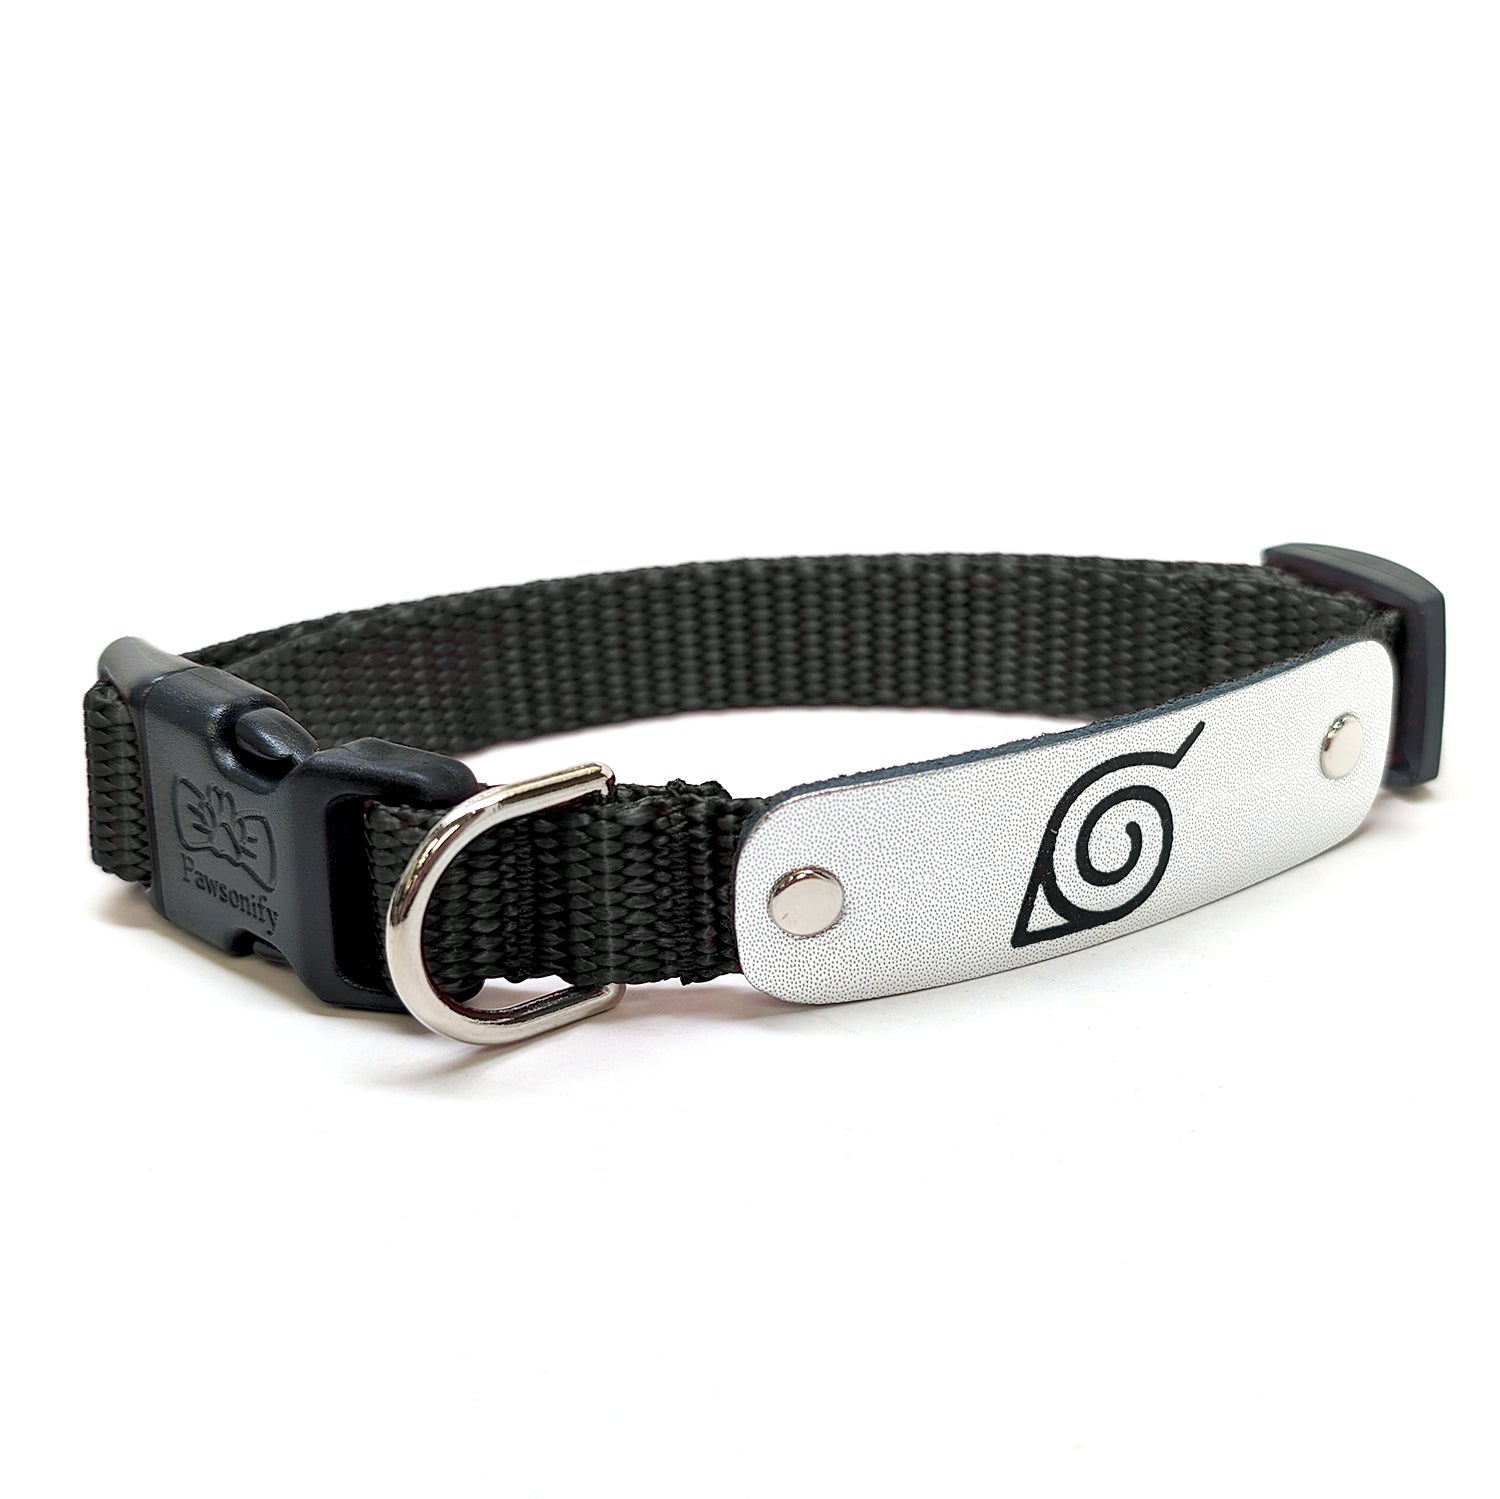 Naruto Shippuden x Pawsonify - Officially Licensed Ninja Collar (Black) for Small Dogs #size_Dog: (S) 11-15